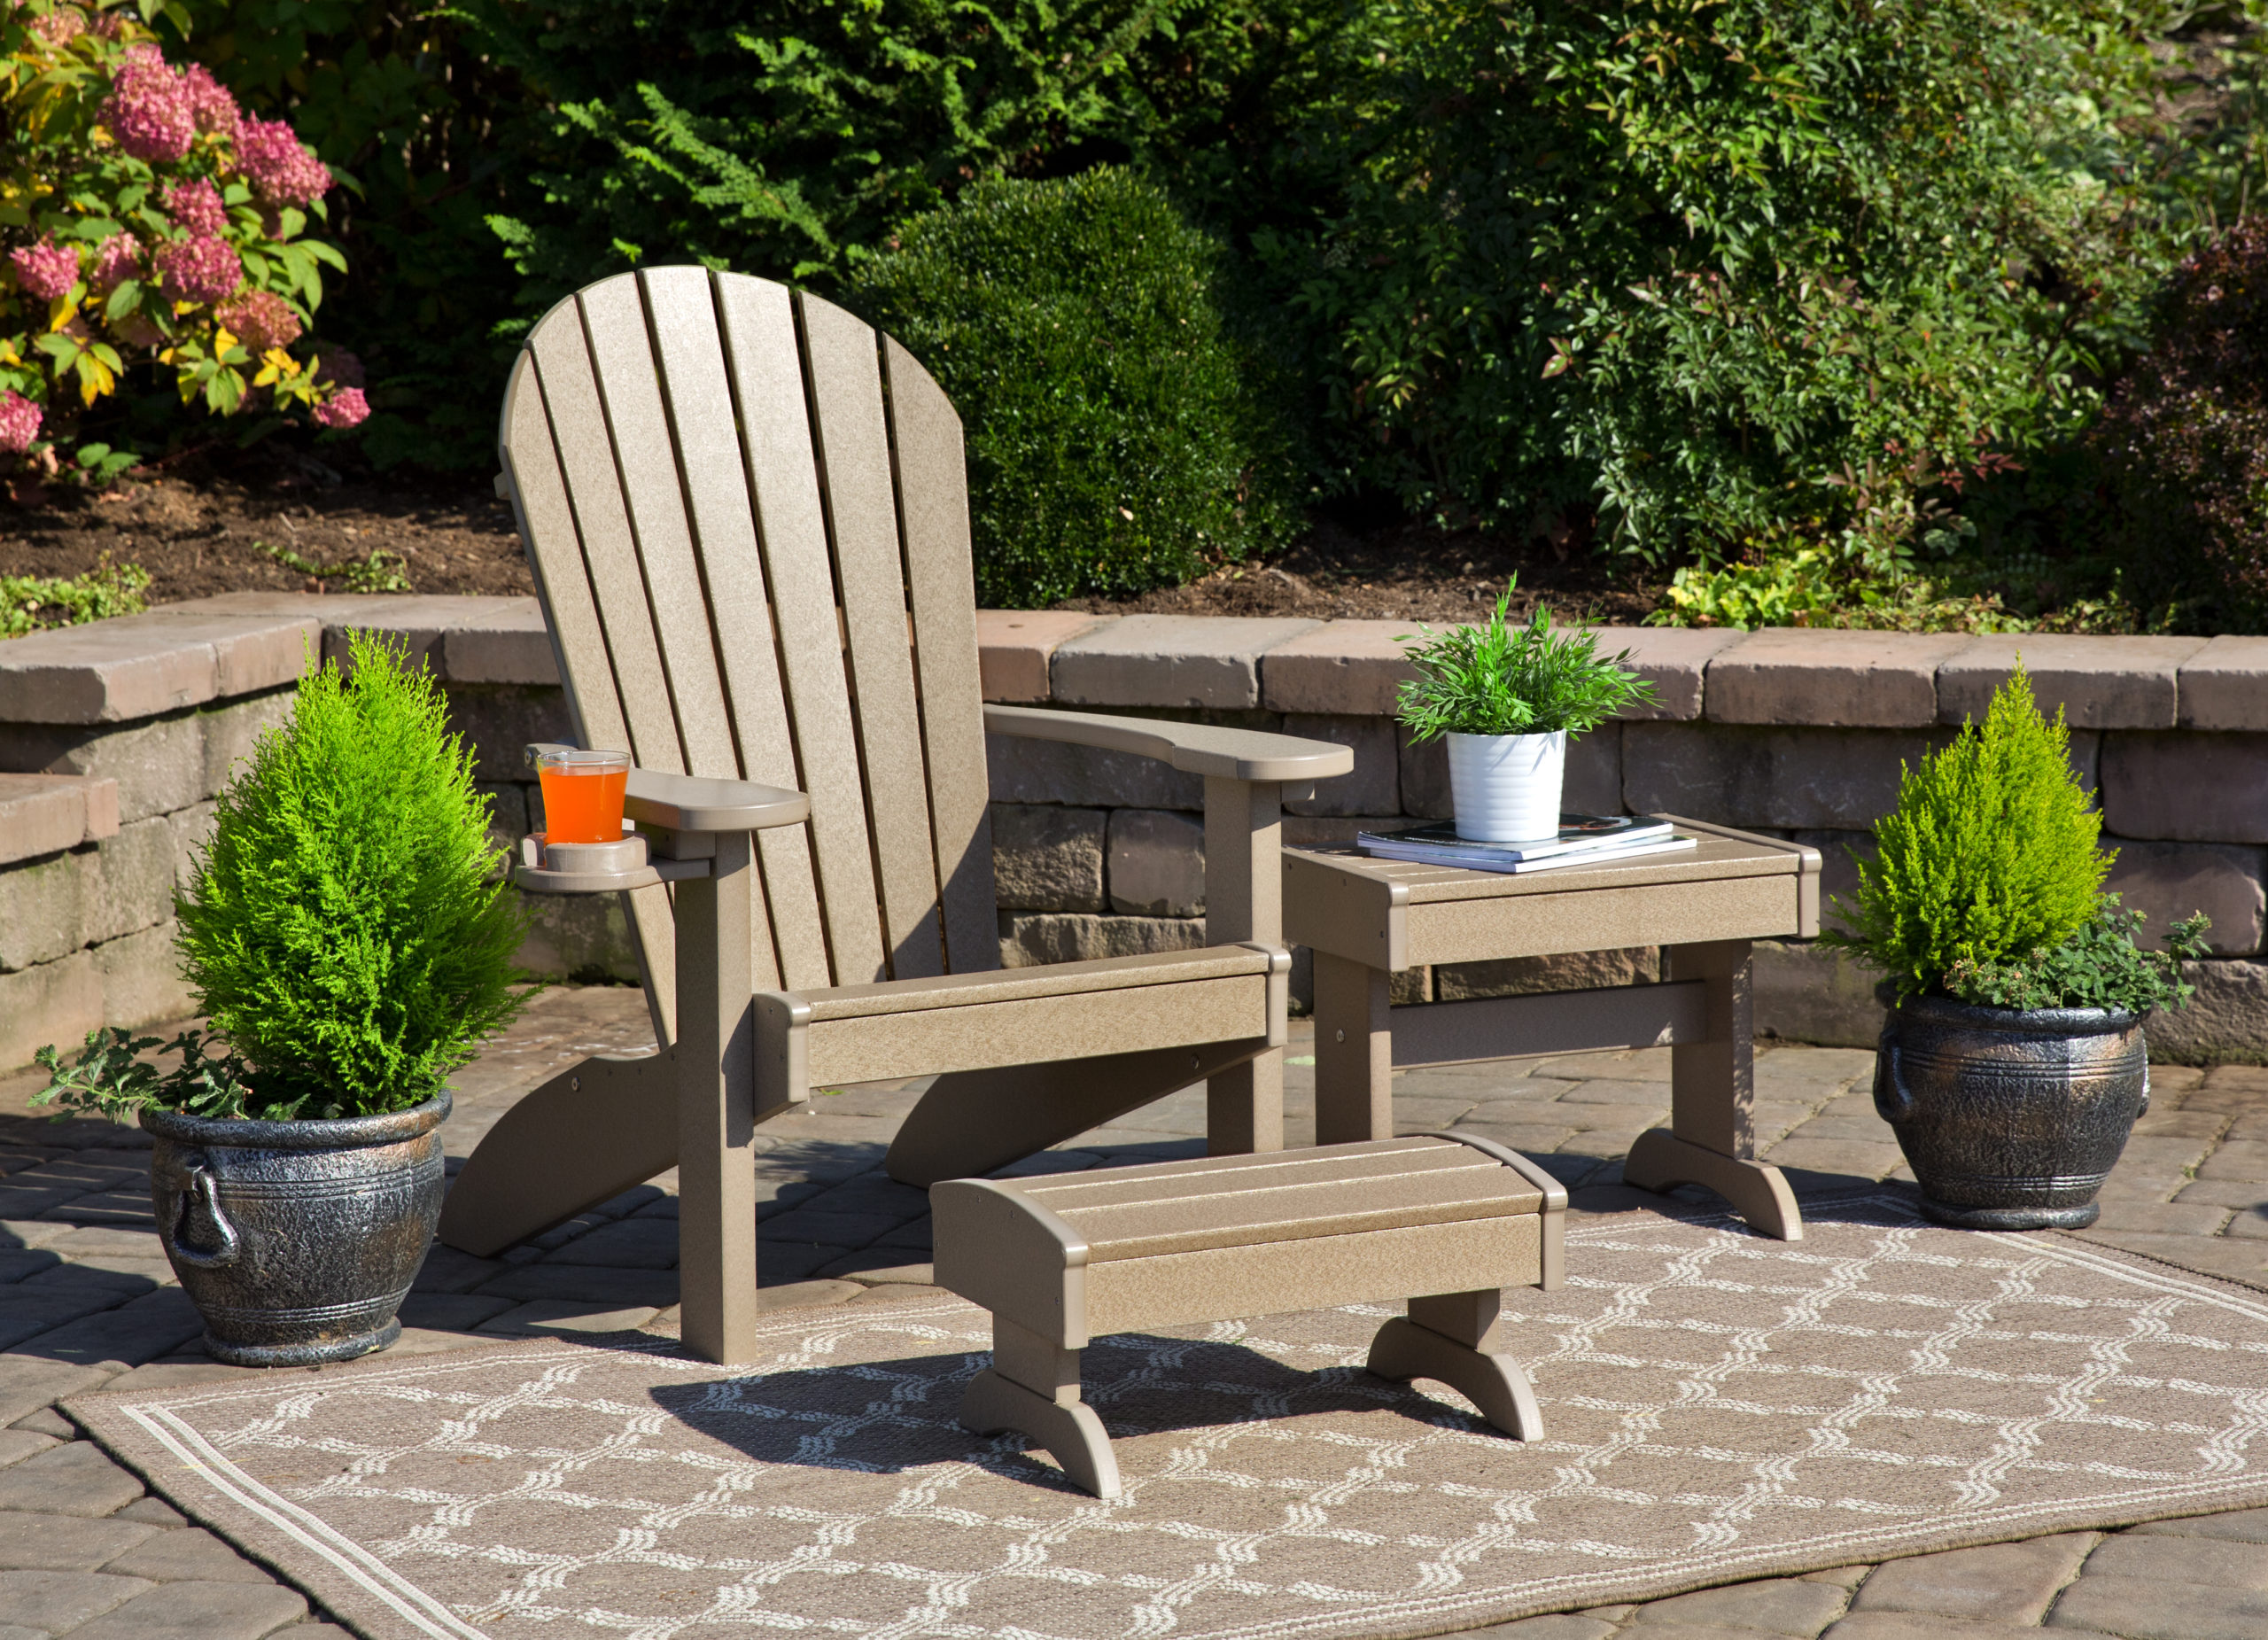 Weathered poly wood deluxe Adirondack chair set.